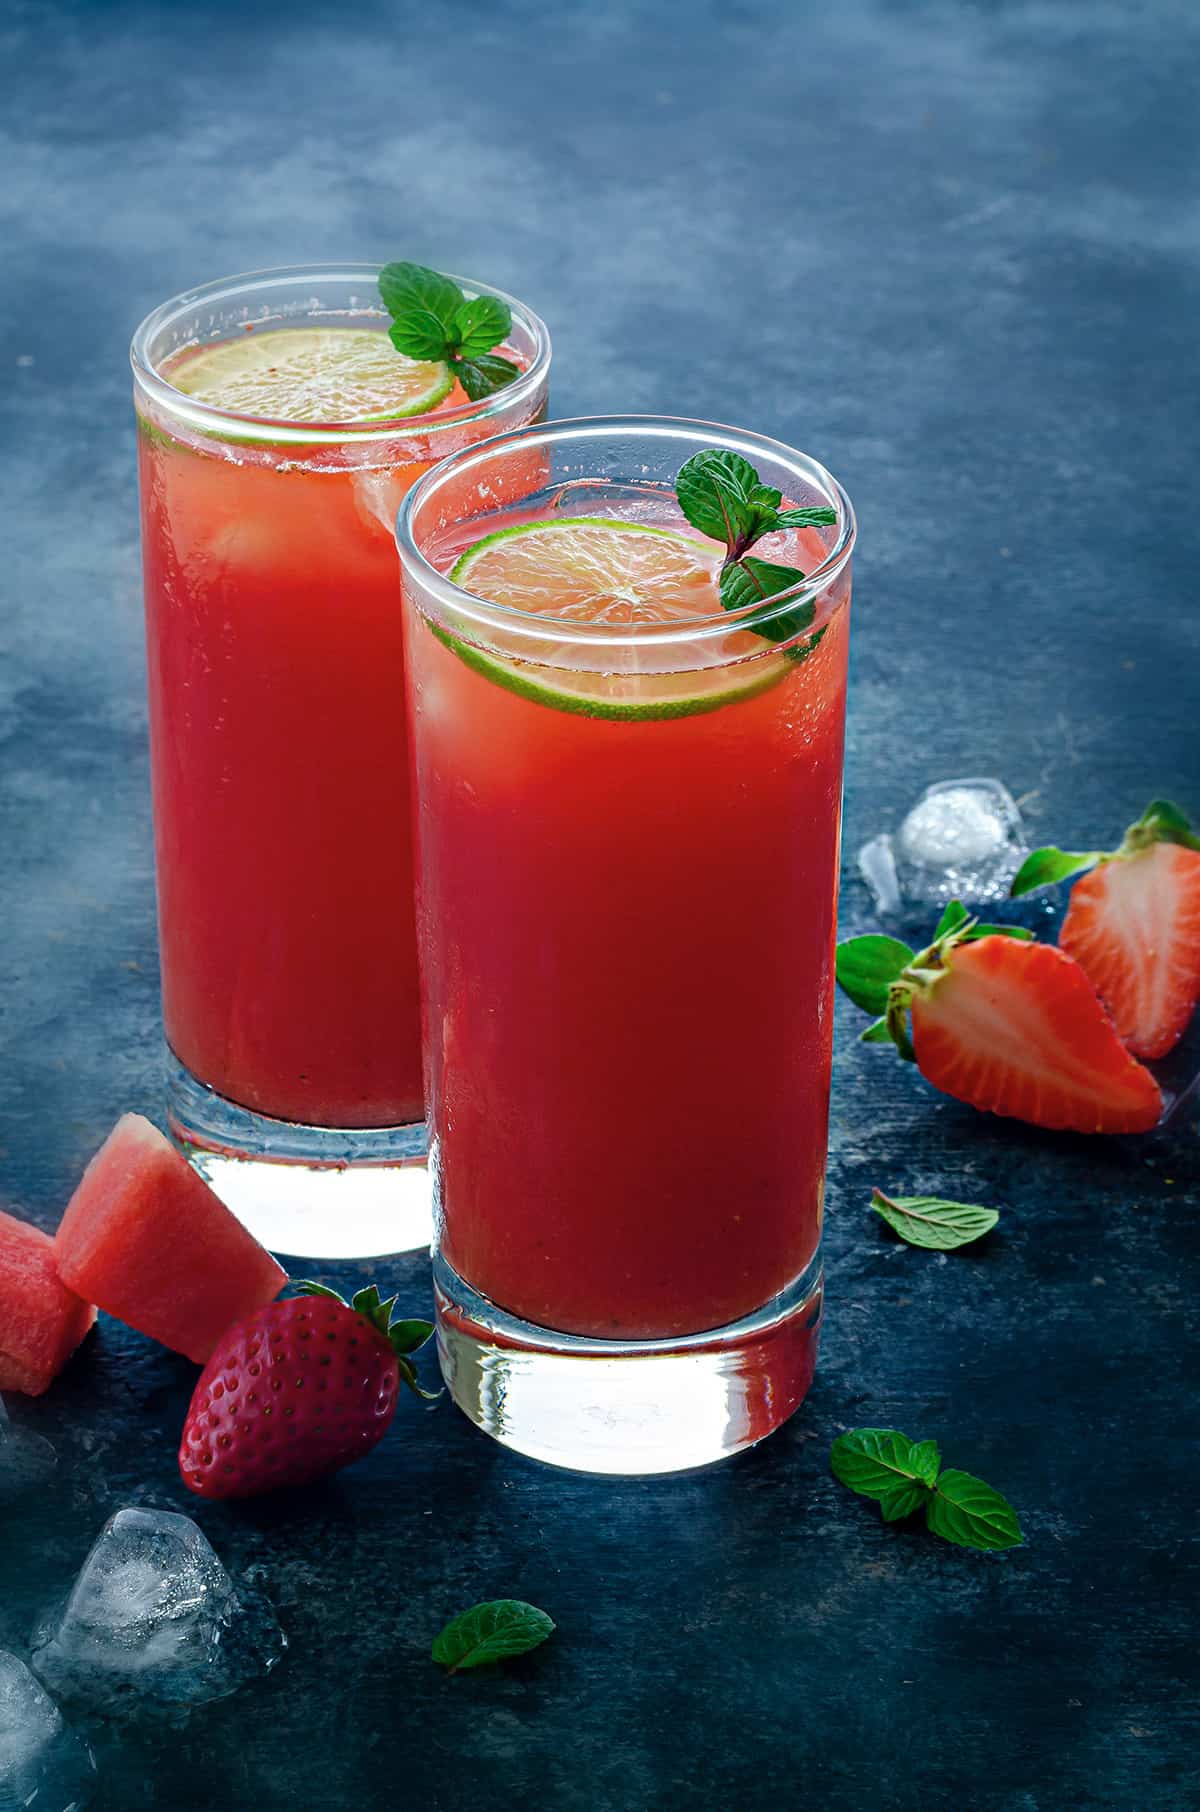 two tall glasses filled with watermelon strawberry lemonade garnished with lemon slices and mint sprigs